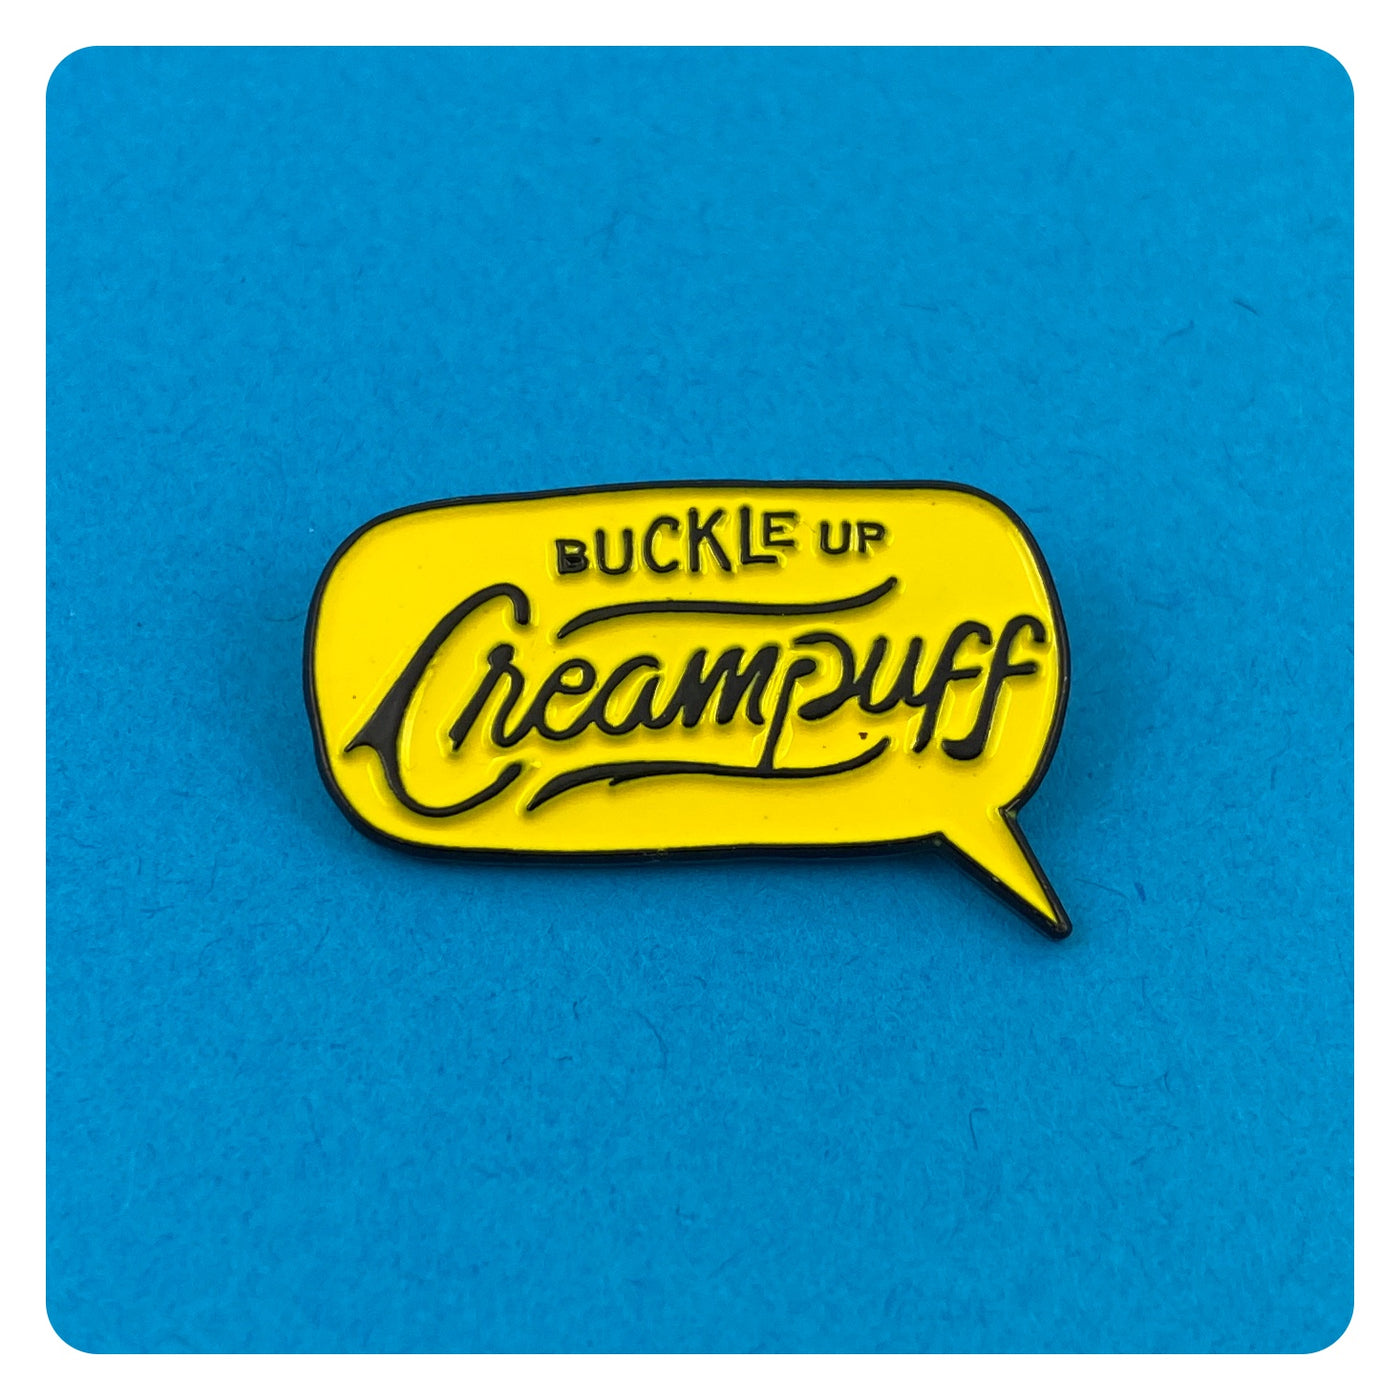 Buckle Up Creampuff Enamel Pin